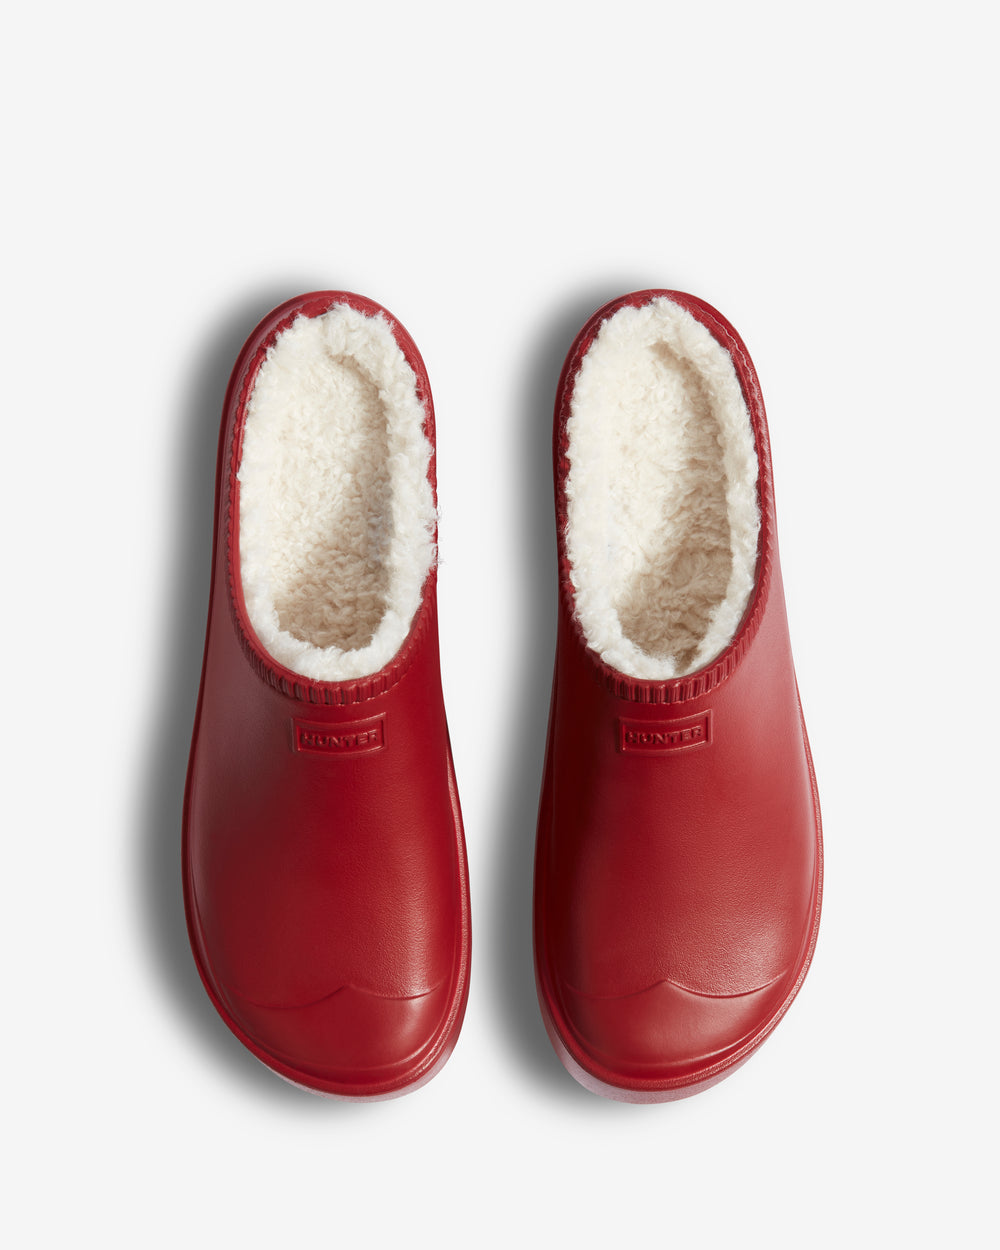 Unisex Insulated Clogs